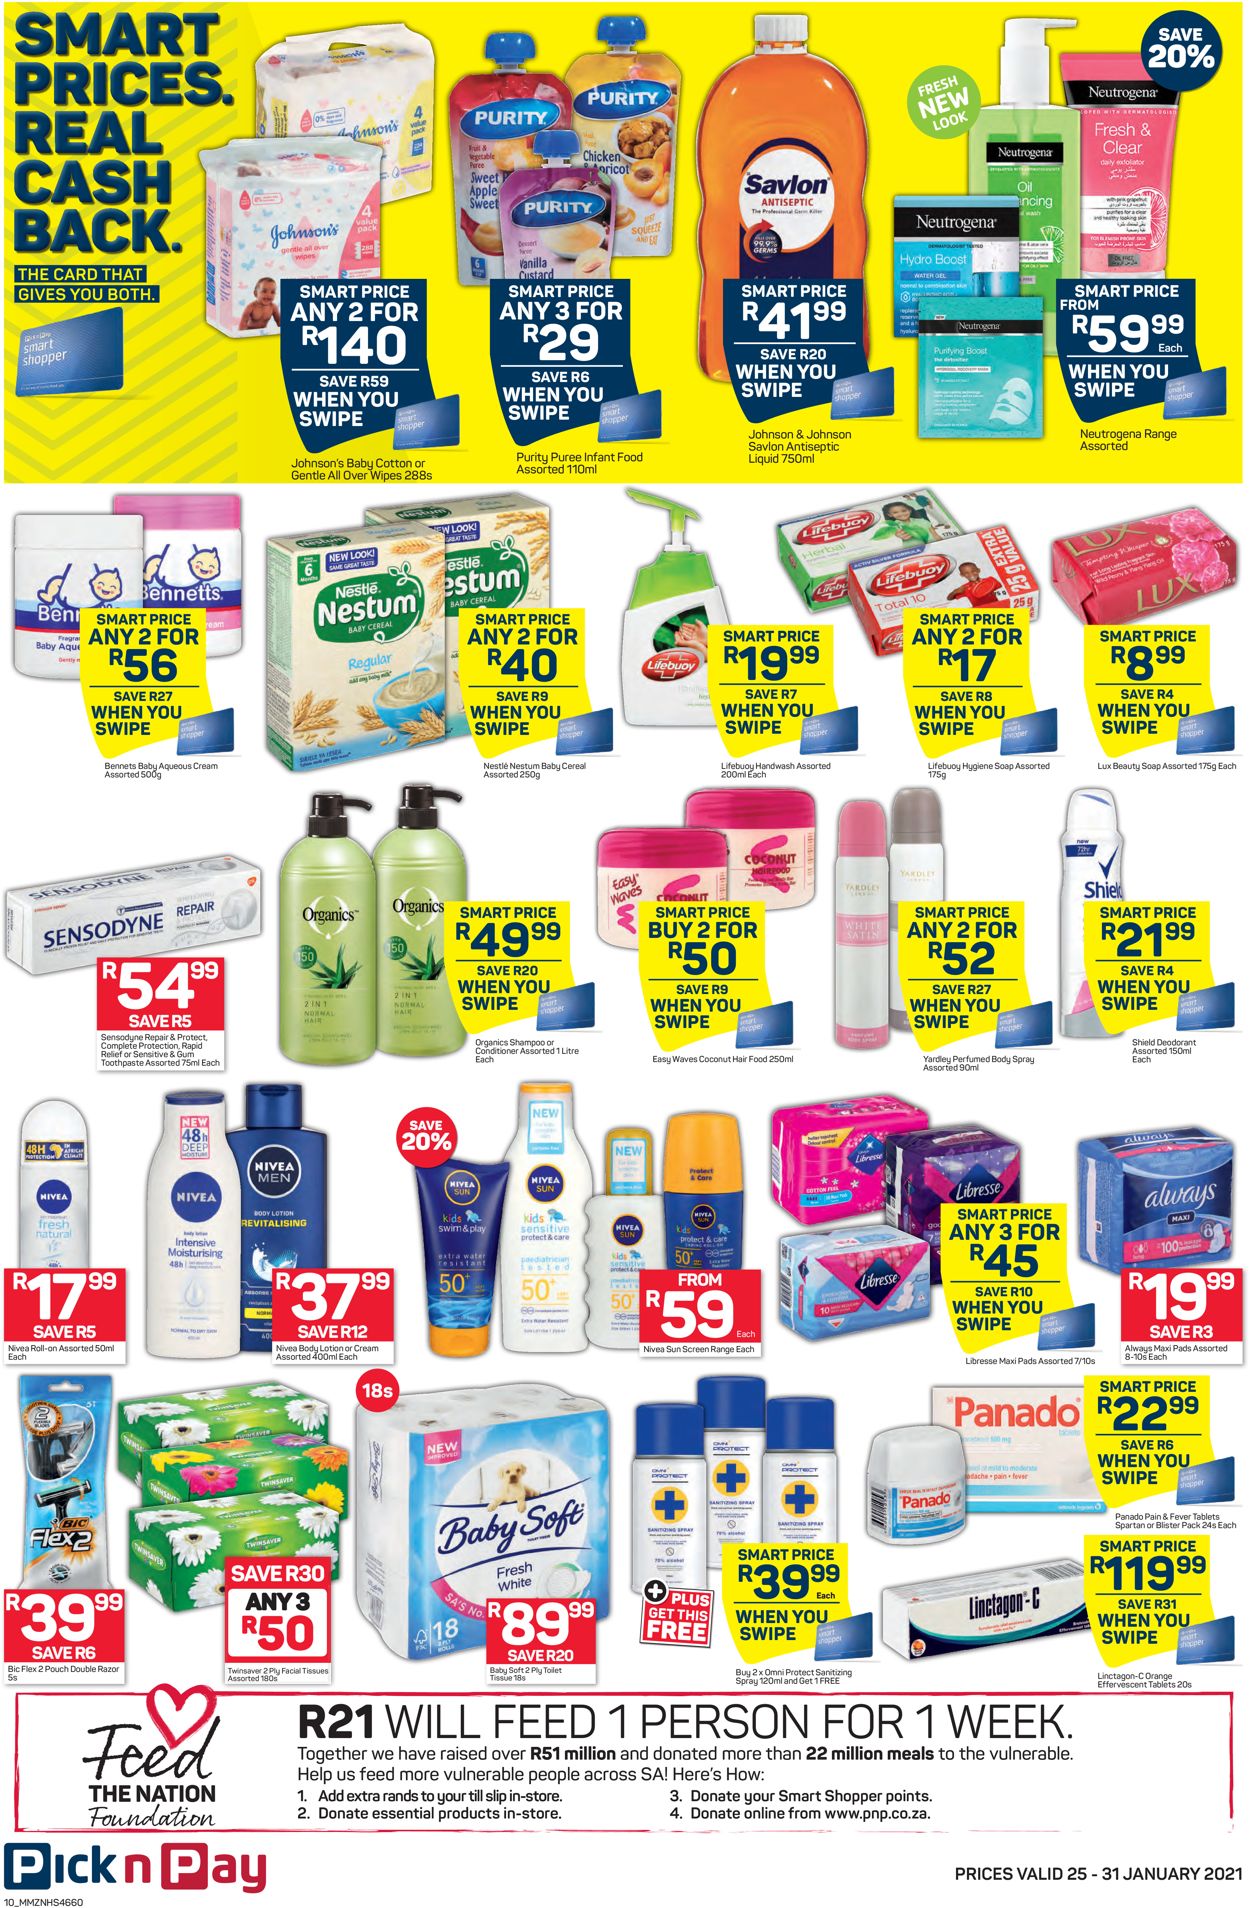 Pick n Pay Smart Price 2021 Catalogue - 2021/01/25-2021/01/31 (Page 10)